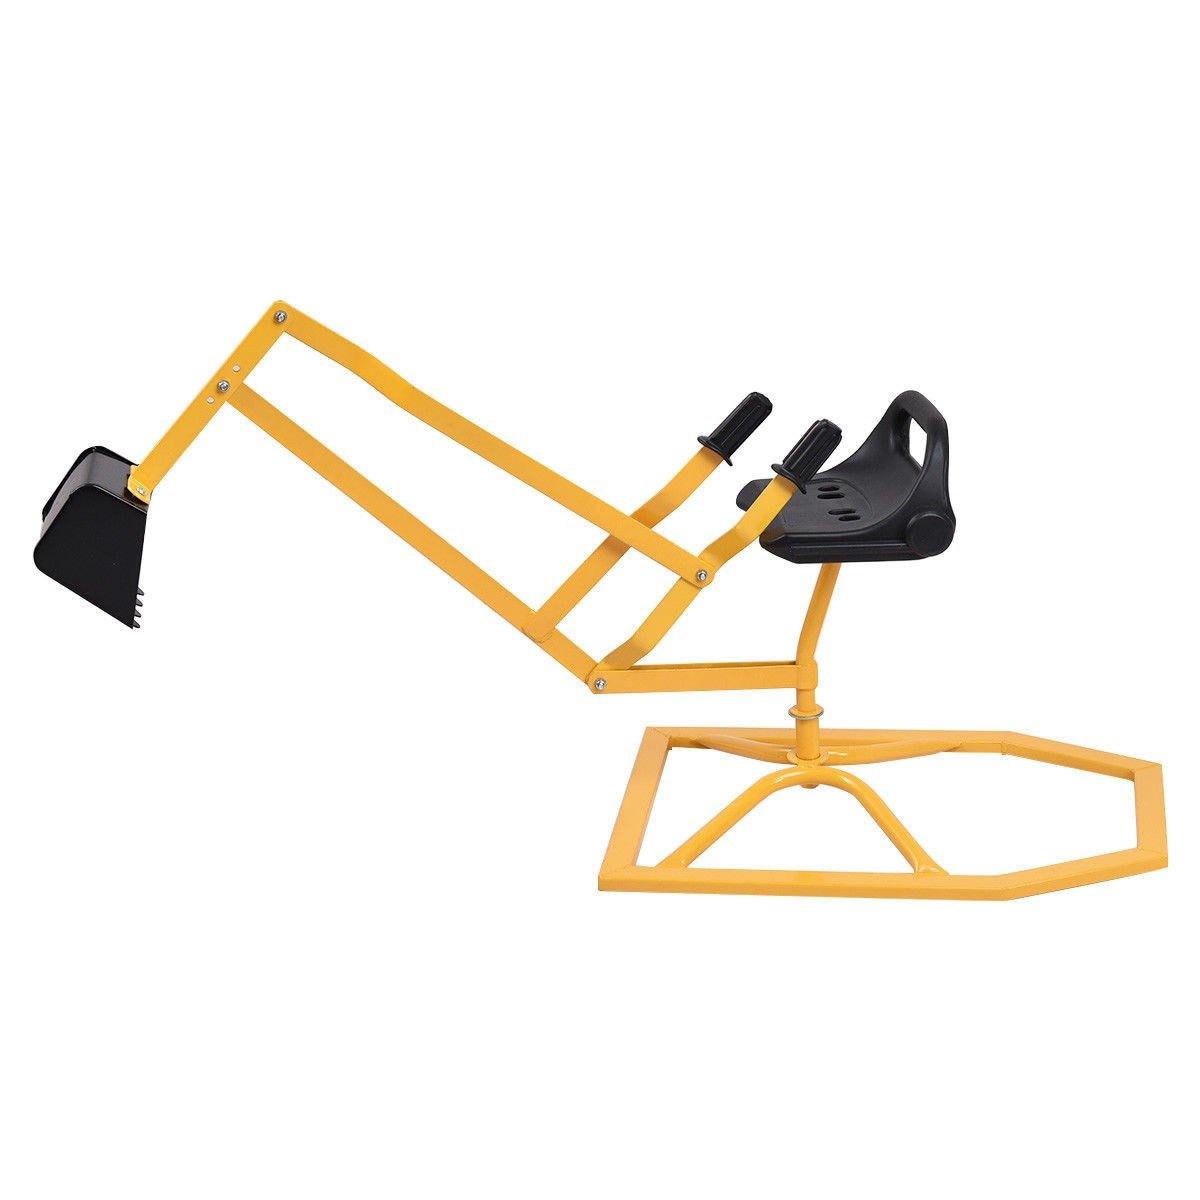 Costzon Kids Ride On Sand Digger, 360 Rotatable Excavator Toy Crane with Base for Sand